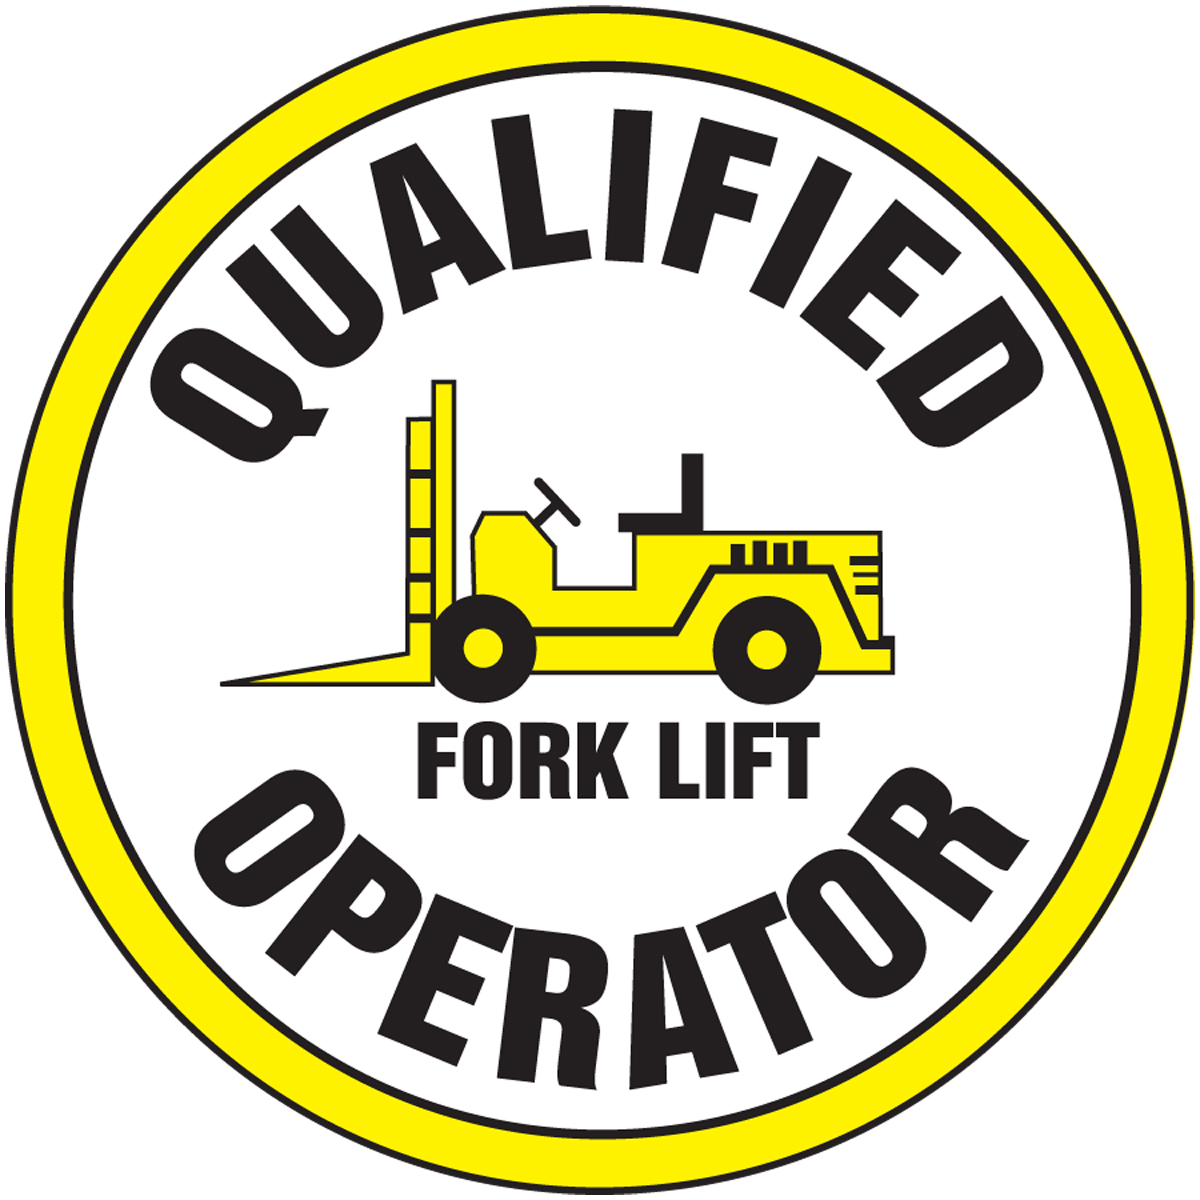 QUALIFIED FORKLIFT OPERATOR W/ GRAPHIC